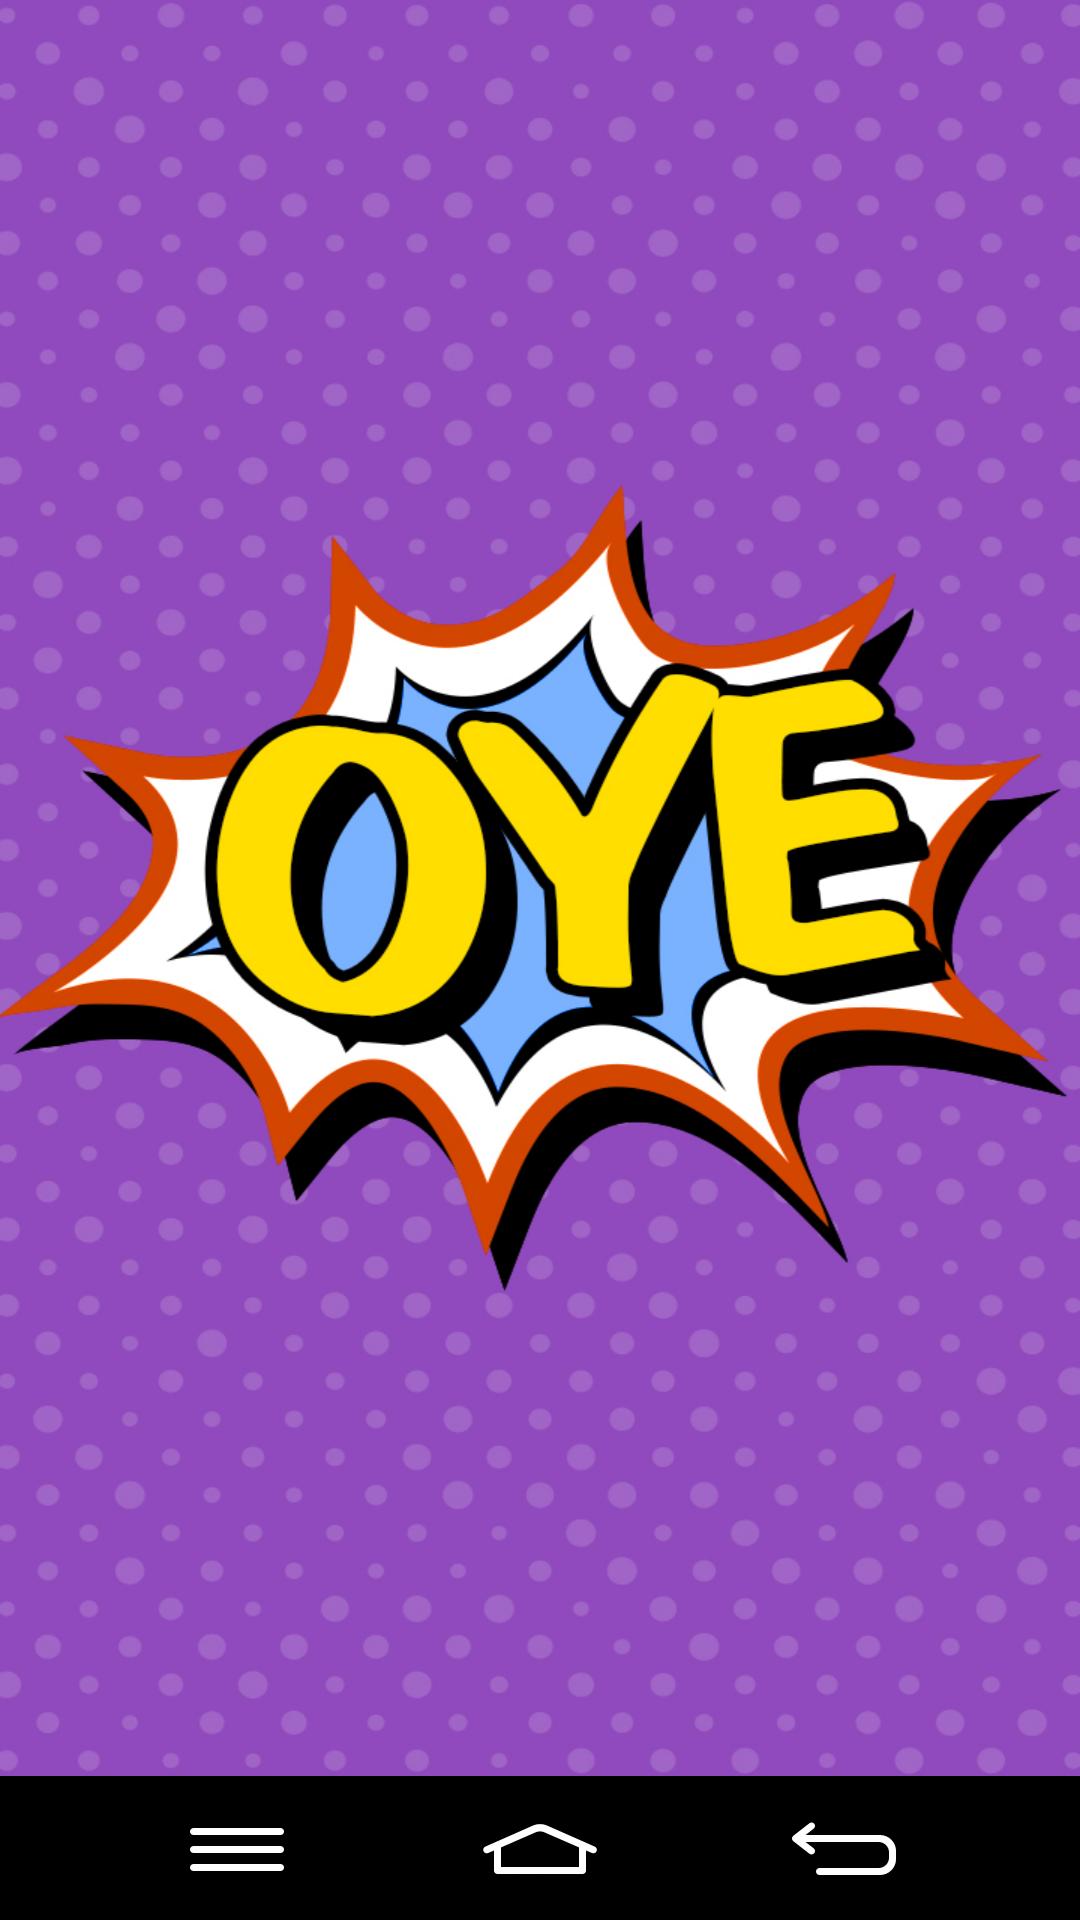 Oye For Android Apk Download verse 1 ahora que si, all the mamis pull your thongs up and party with me on the count of three, everybody claim where your from one, two, three! oye for android apk download